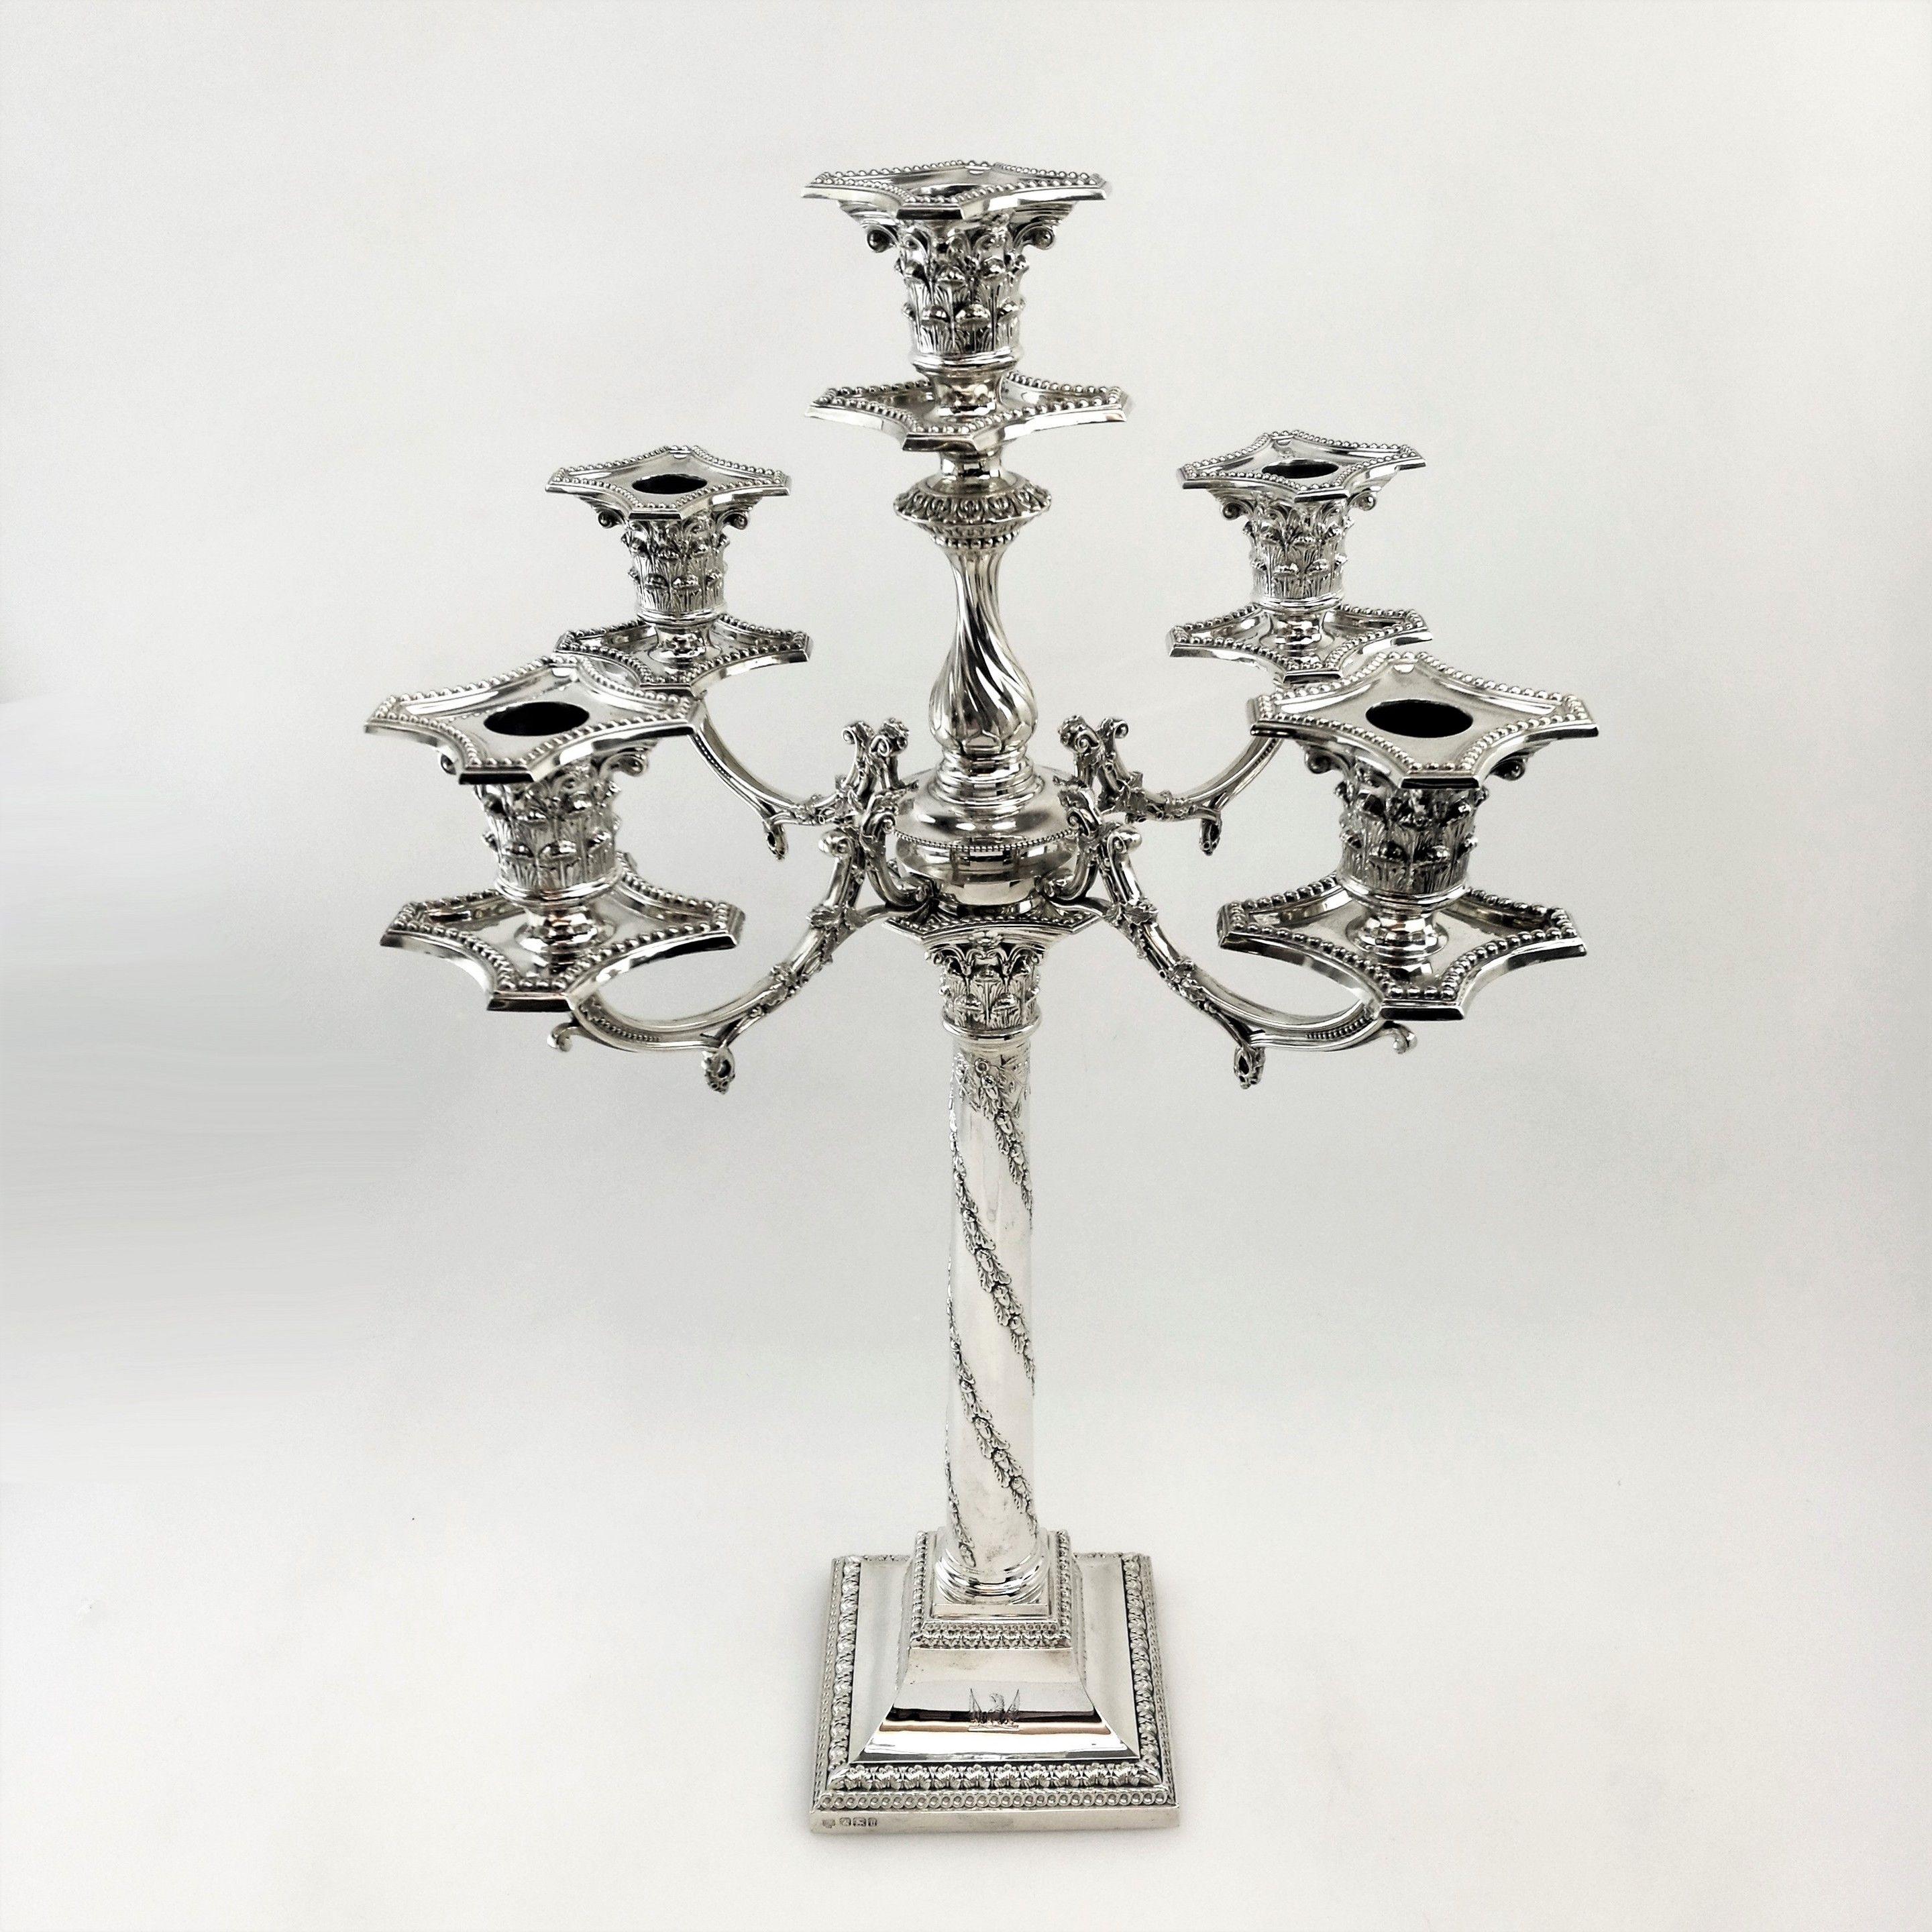 A magnificent pair of Victorian 5-light candelabra on substantial square bases and supported by oak wreath columns with Corinthian capitals. The ornate branches are topped with Corinthian capitals with push fit sconces embellished with a traditional